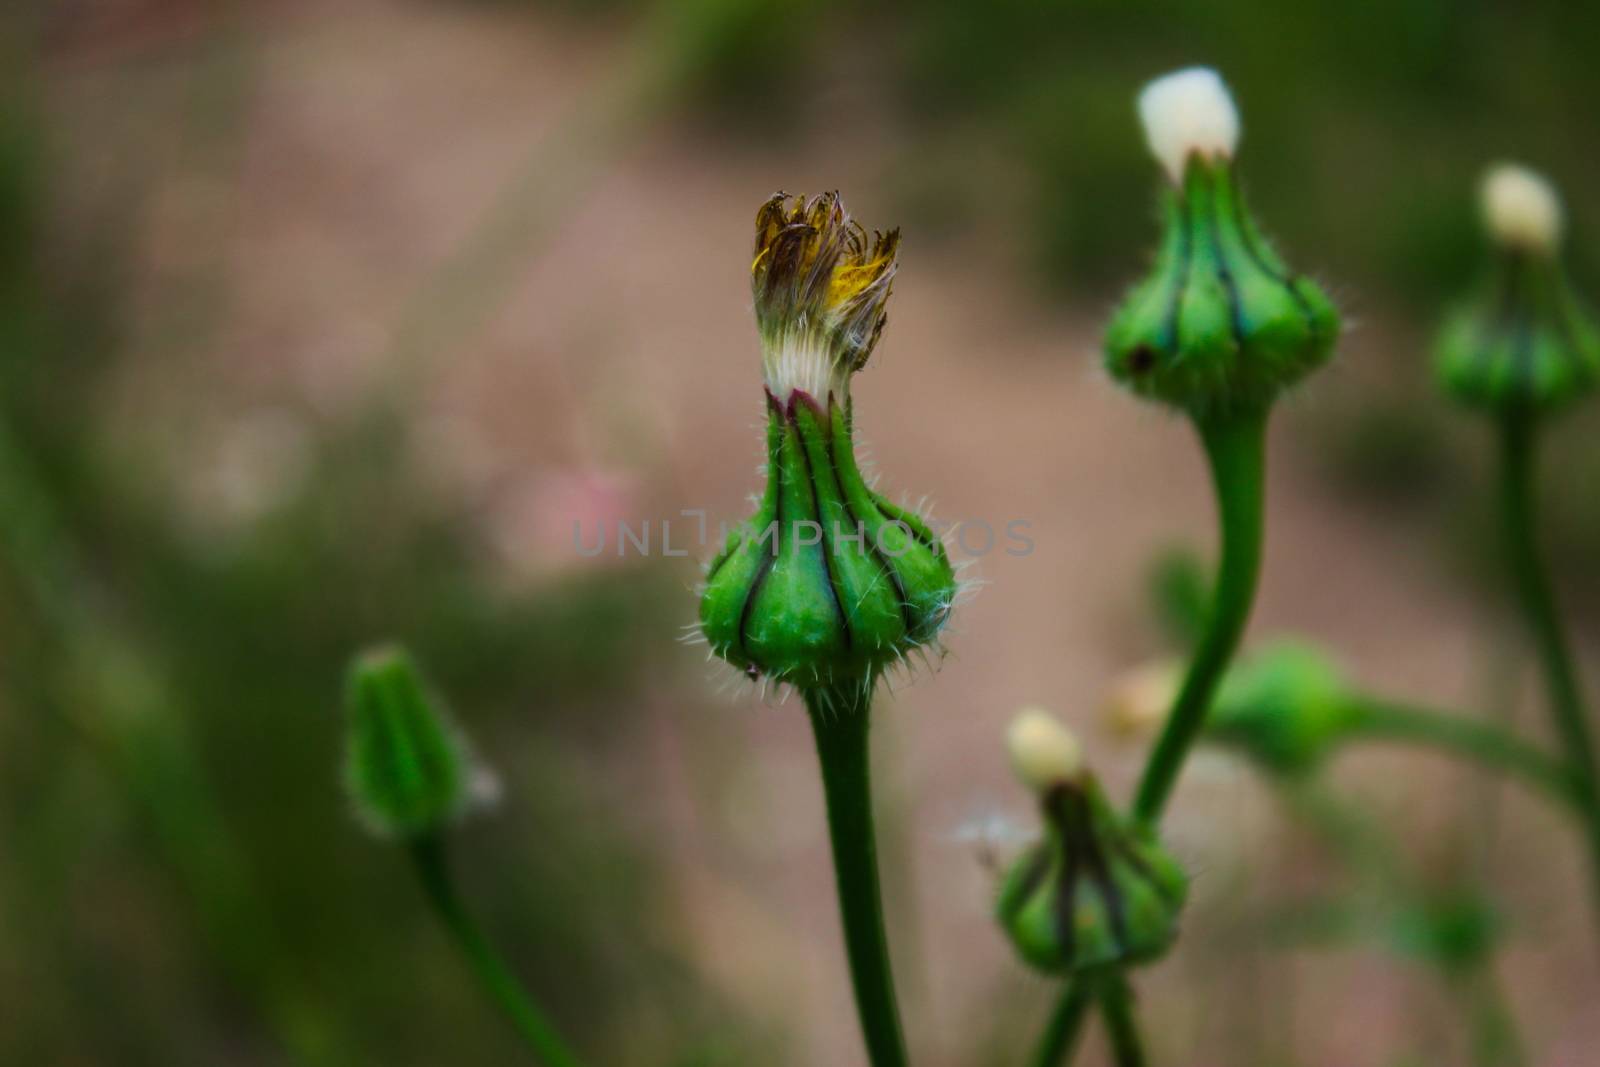 Close up of dandelion flower ready to open. Ready for seed head. Beja, Portugal. by mahirrov